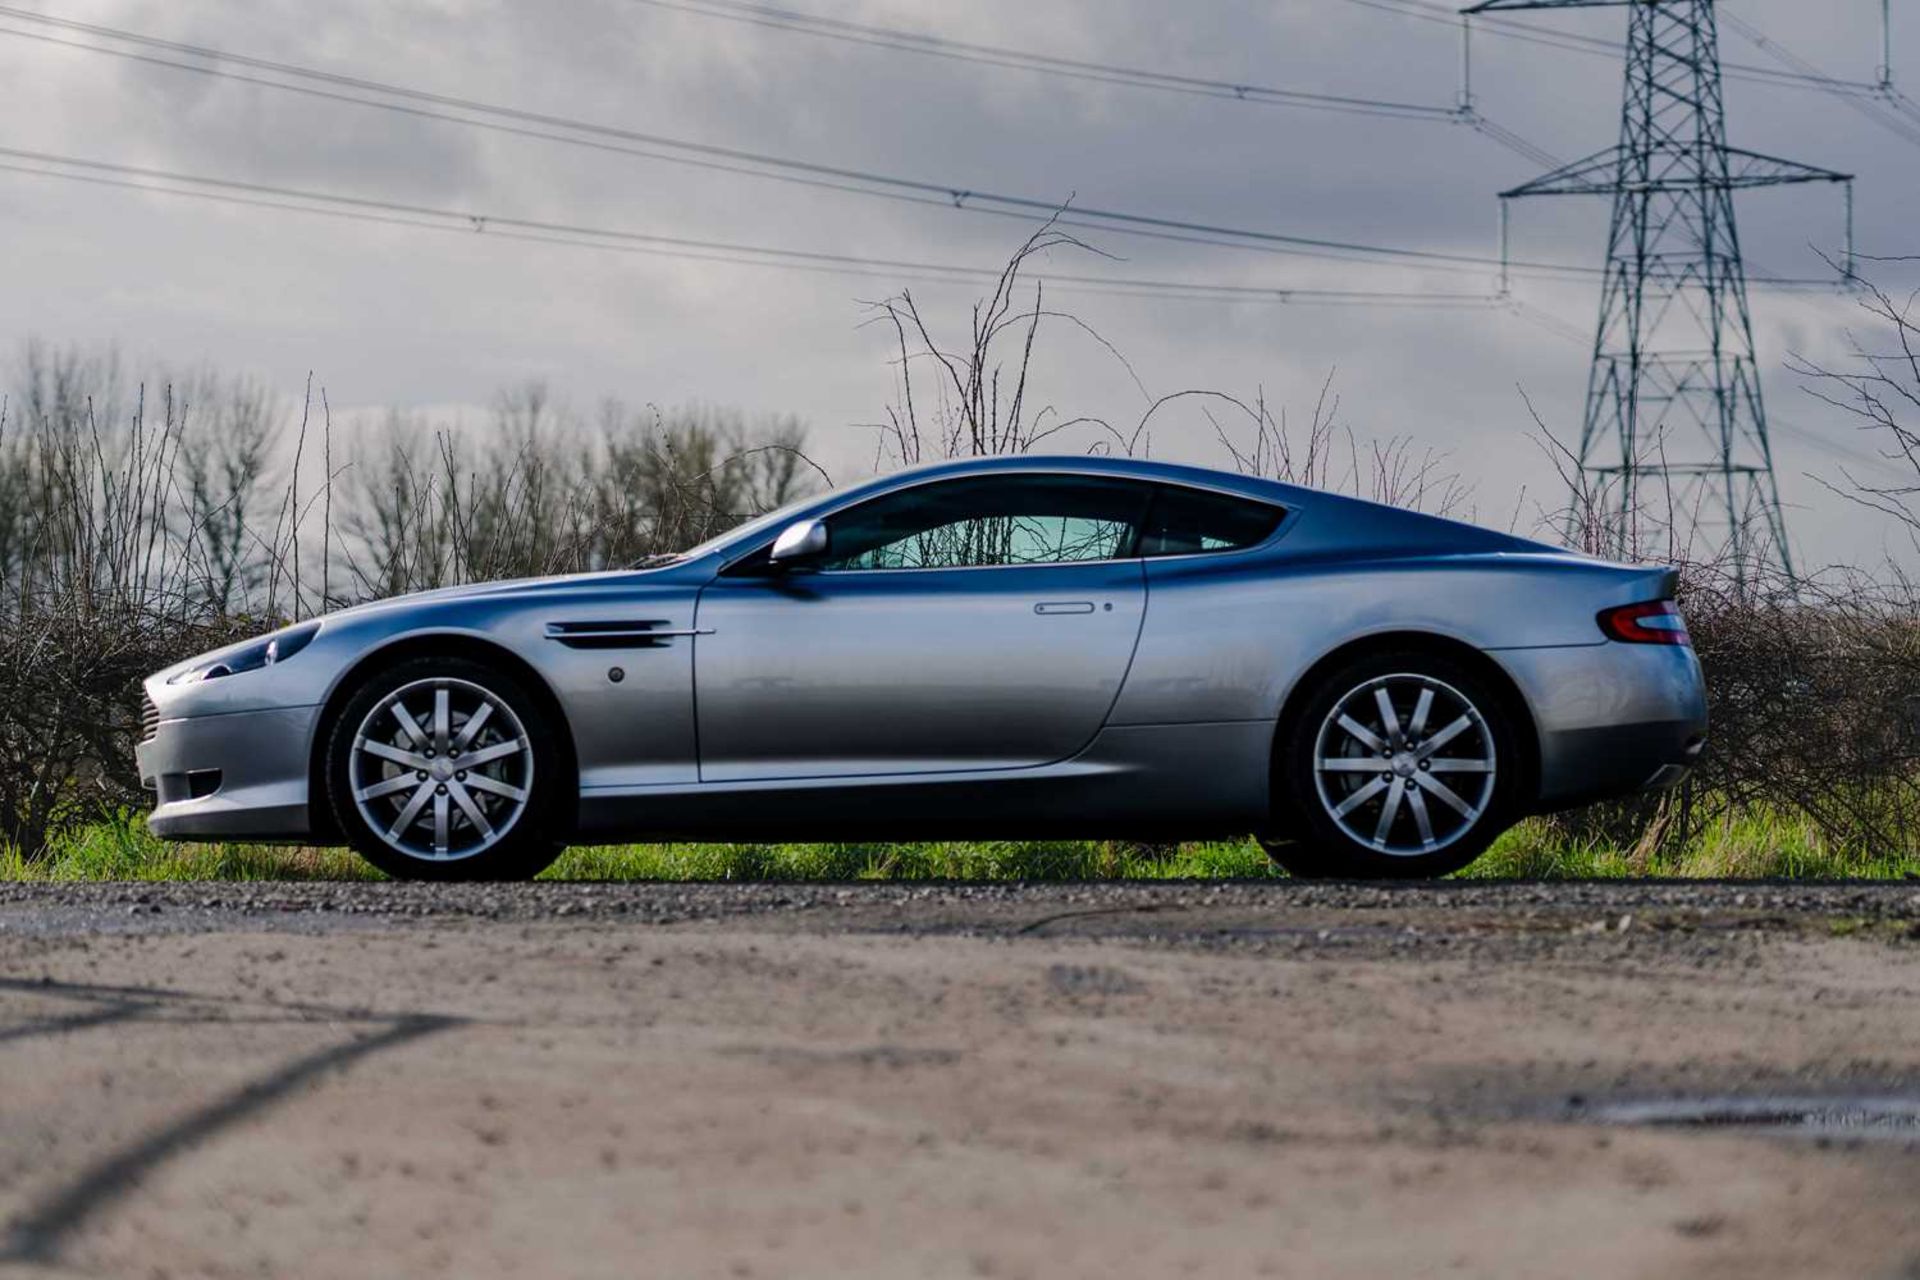 2005 Aston Martin DB9 V12 Only 33,000 miles with full Aston Martin service history - Image 7 of 70